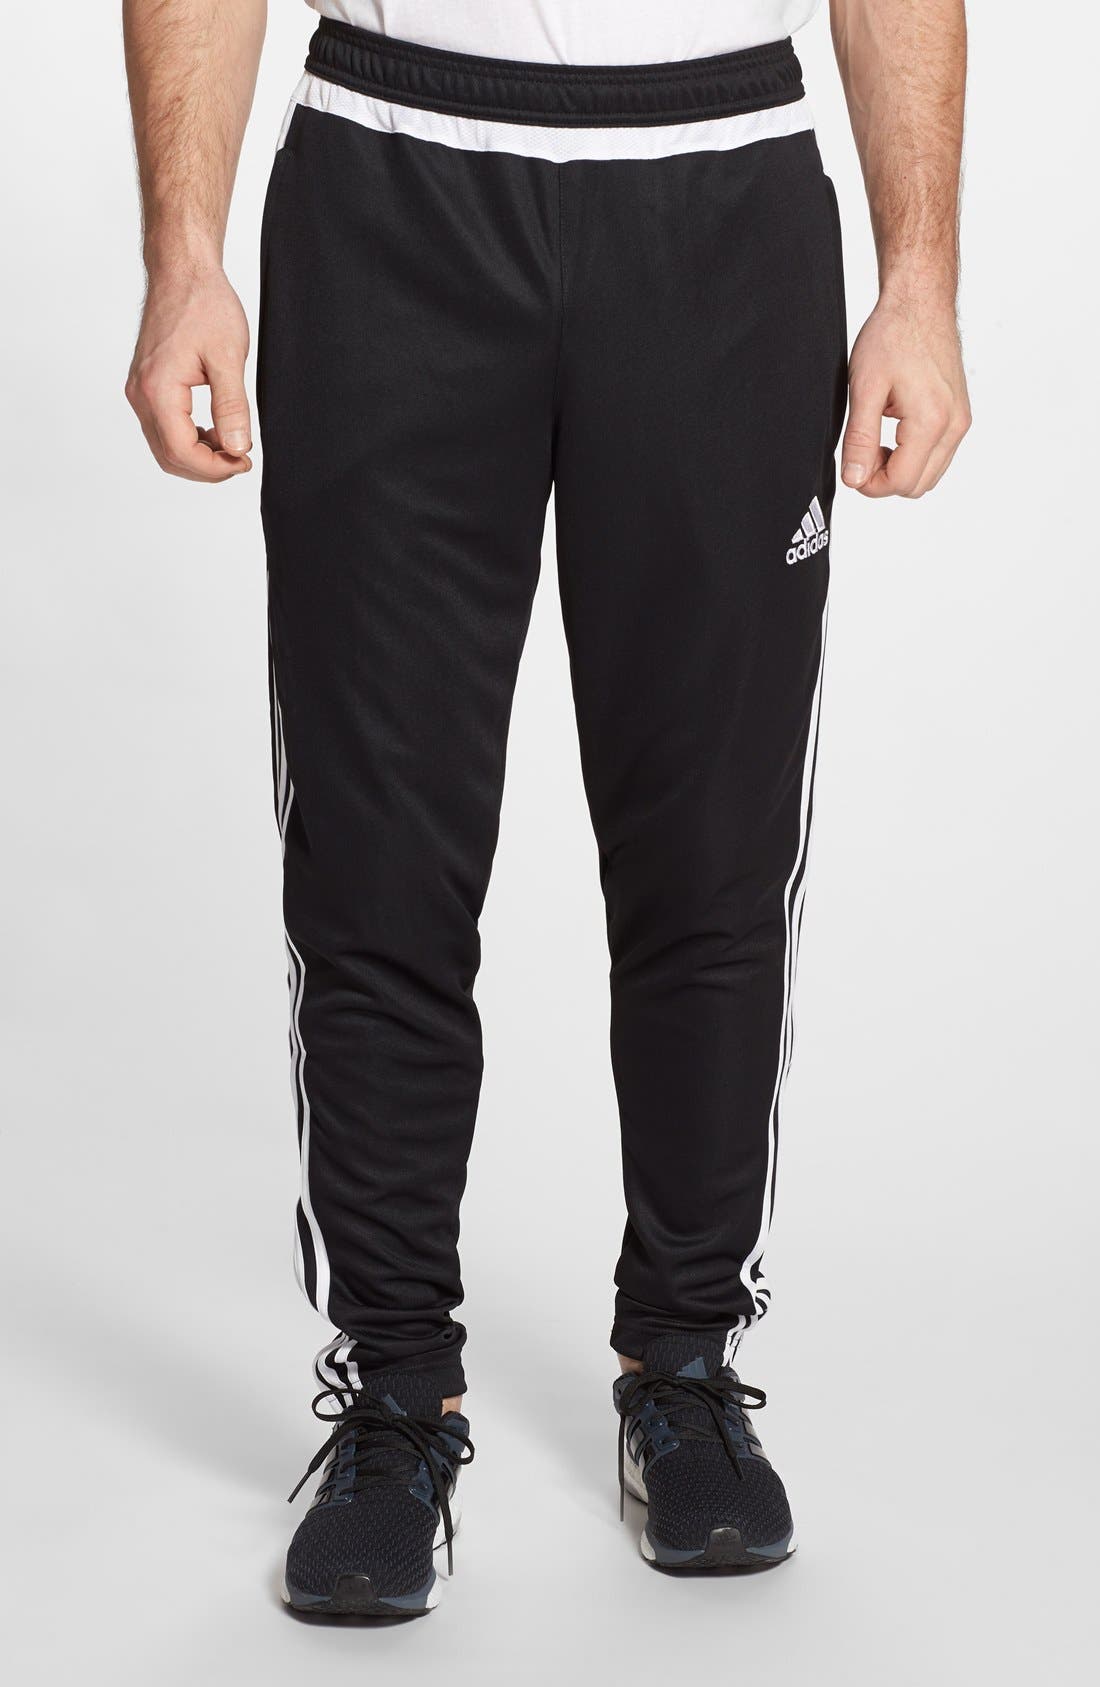 adidas climacool tapered pants